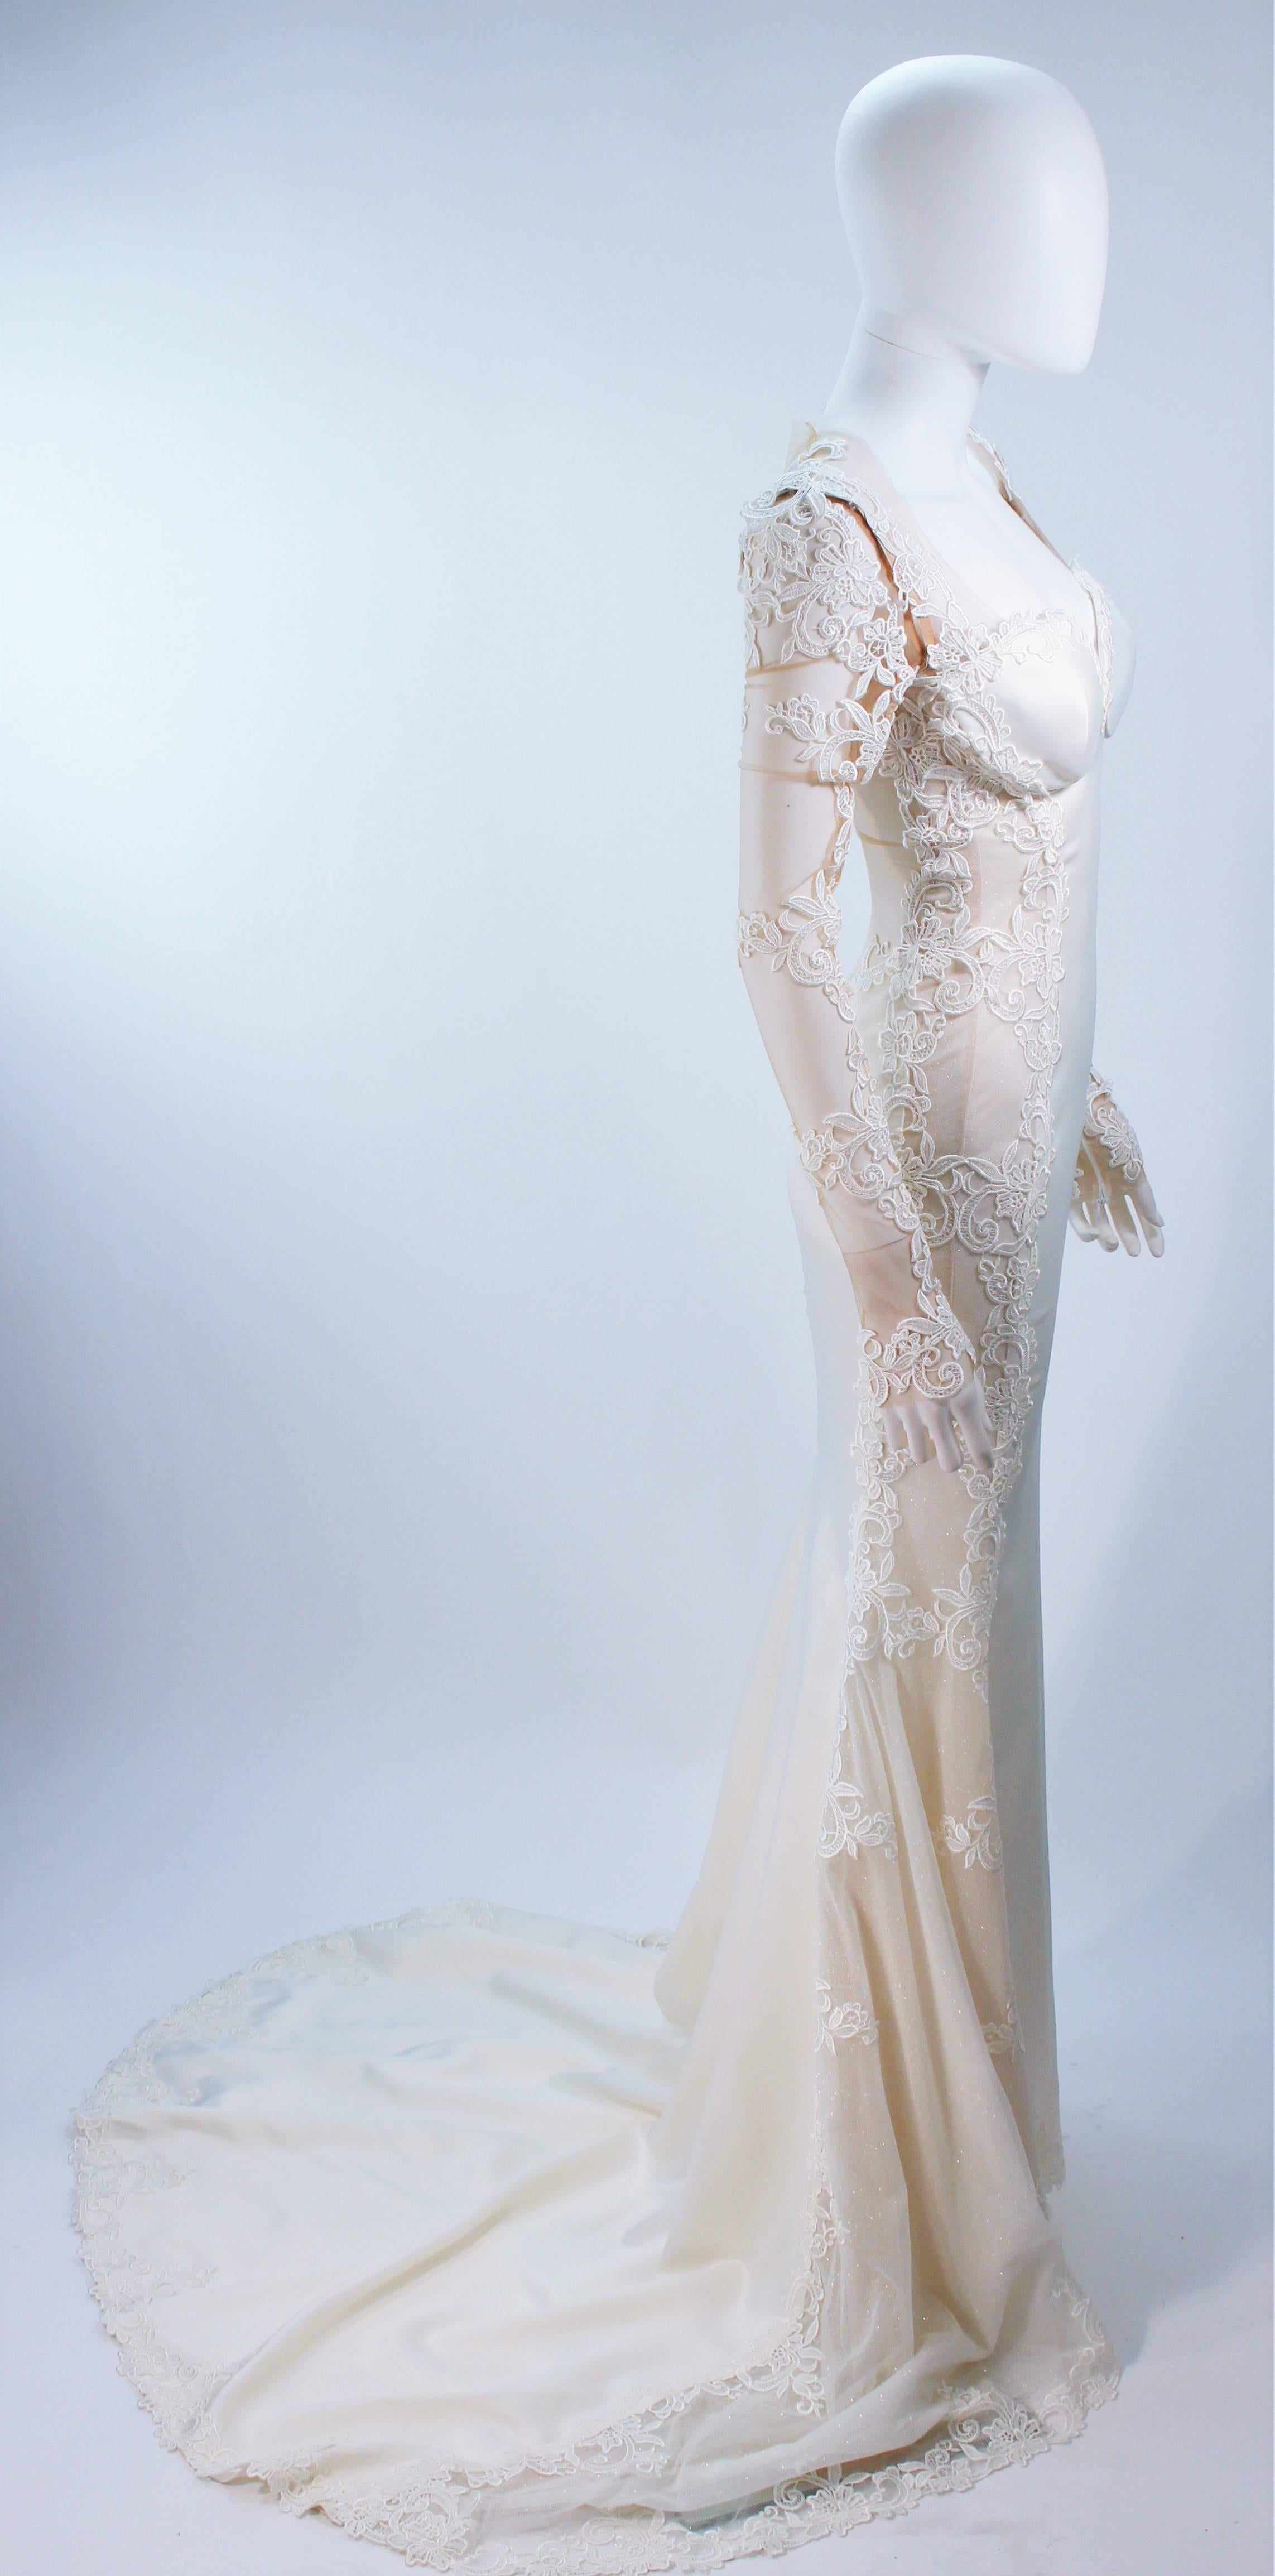 GALIA LAHAV Couture White Floral Lace Gown with Train and Sheer Details Size 2 2